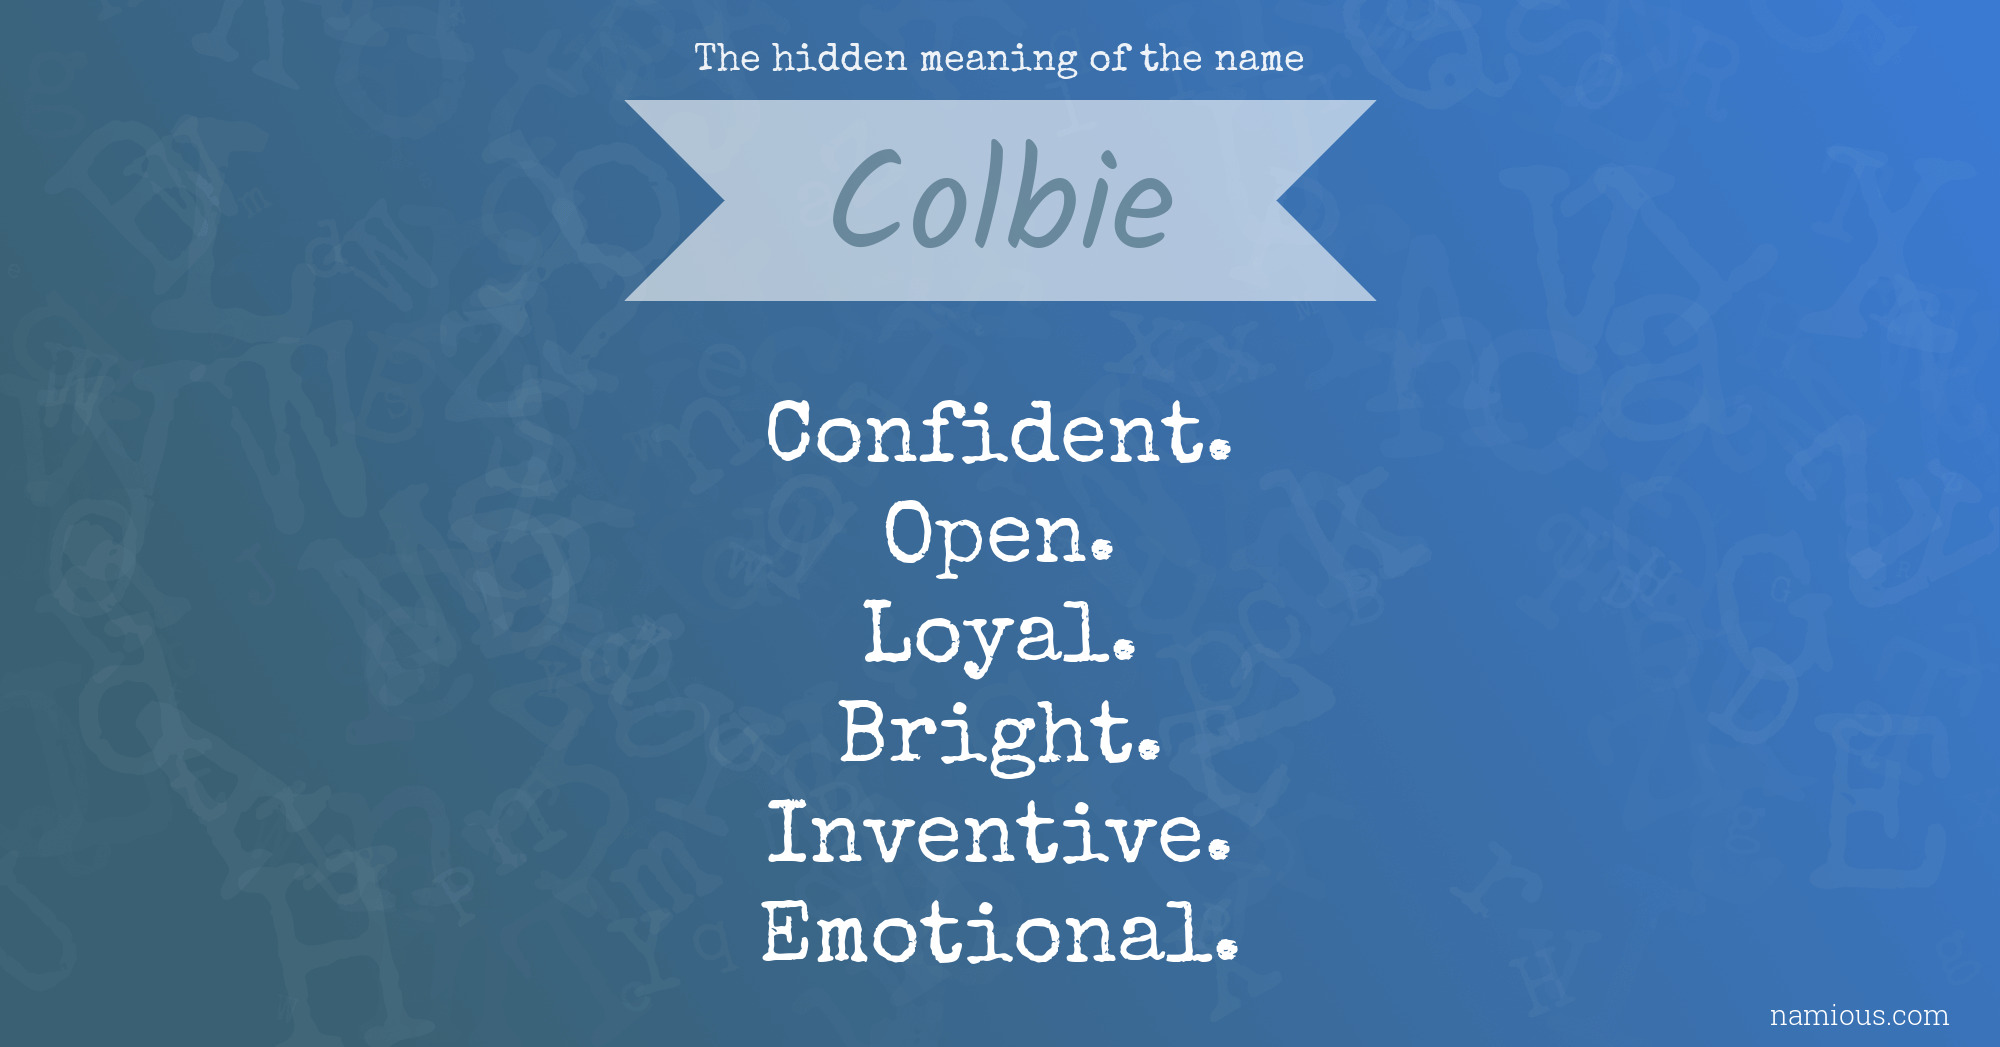 The hidden meaning of the name Colbie